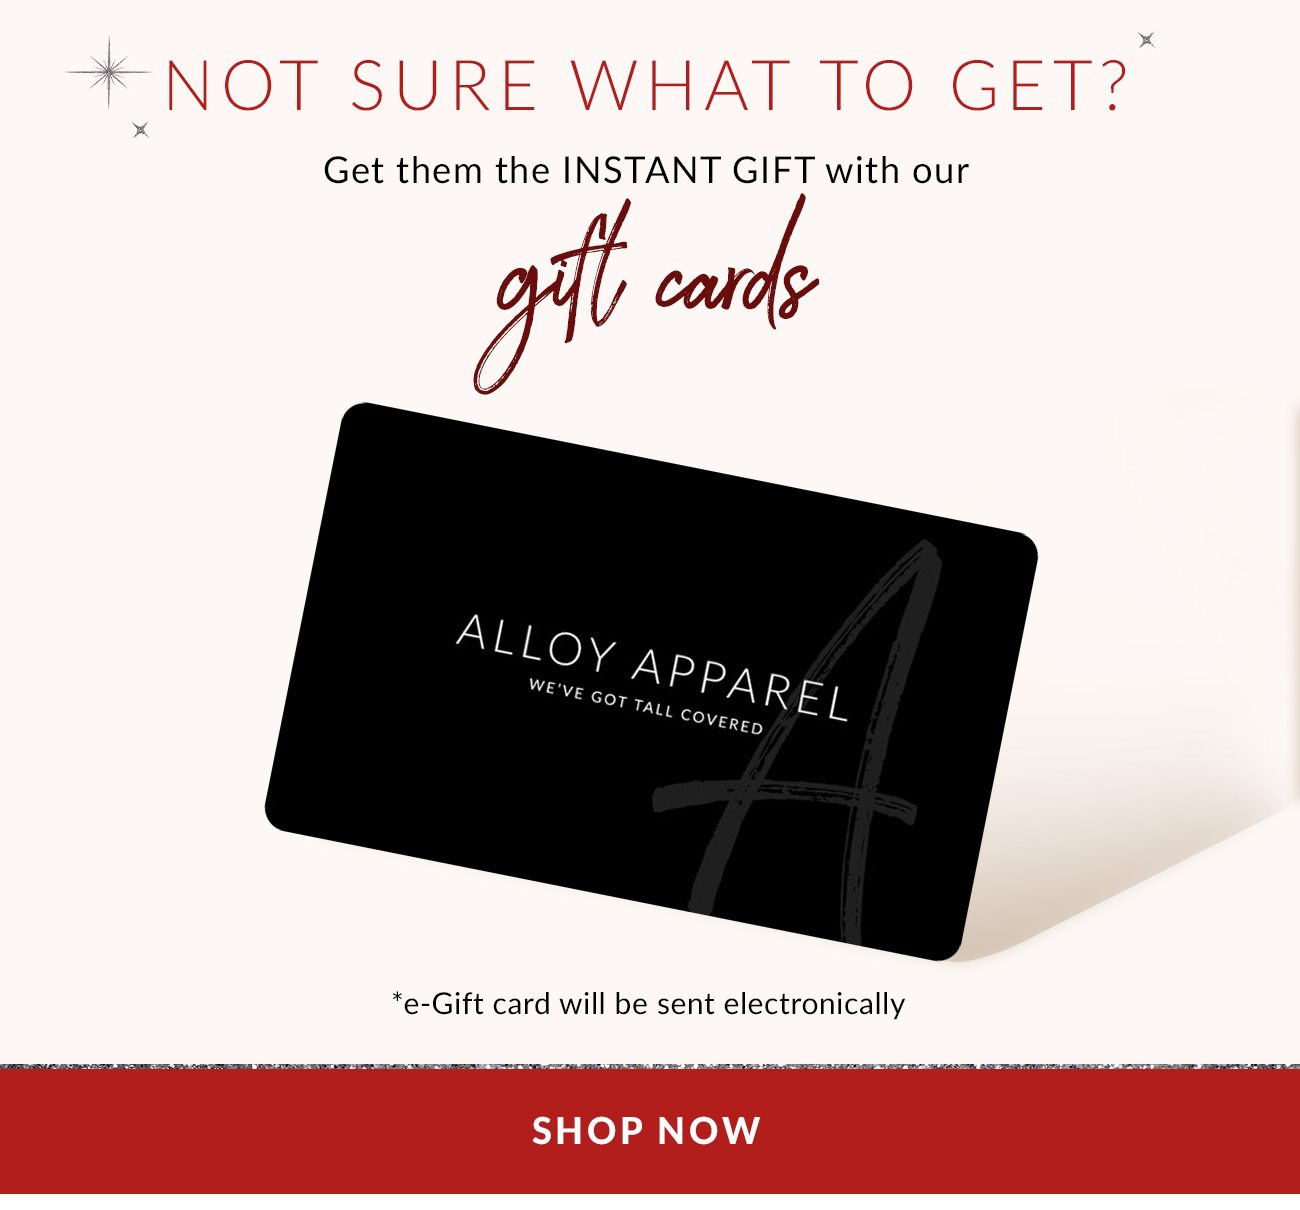 Not Sure What to Get? Shop Gift Cards